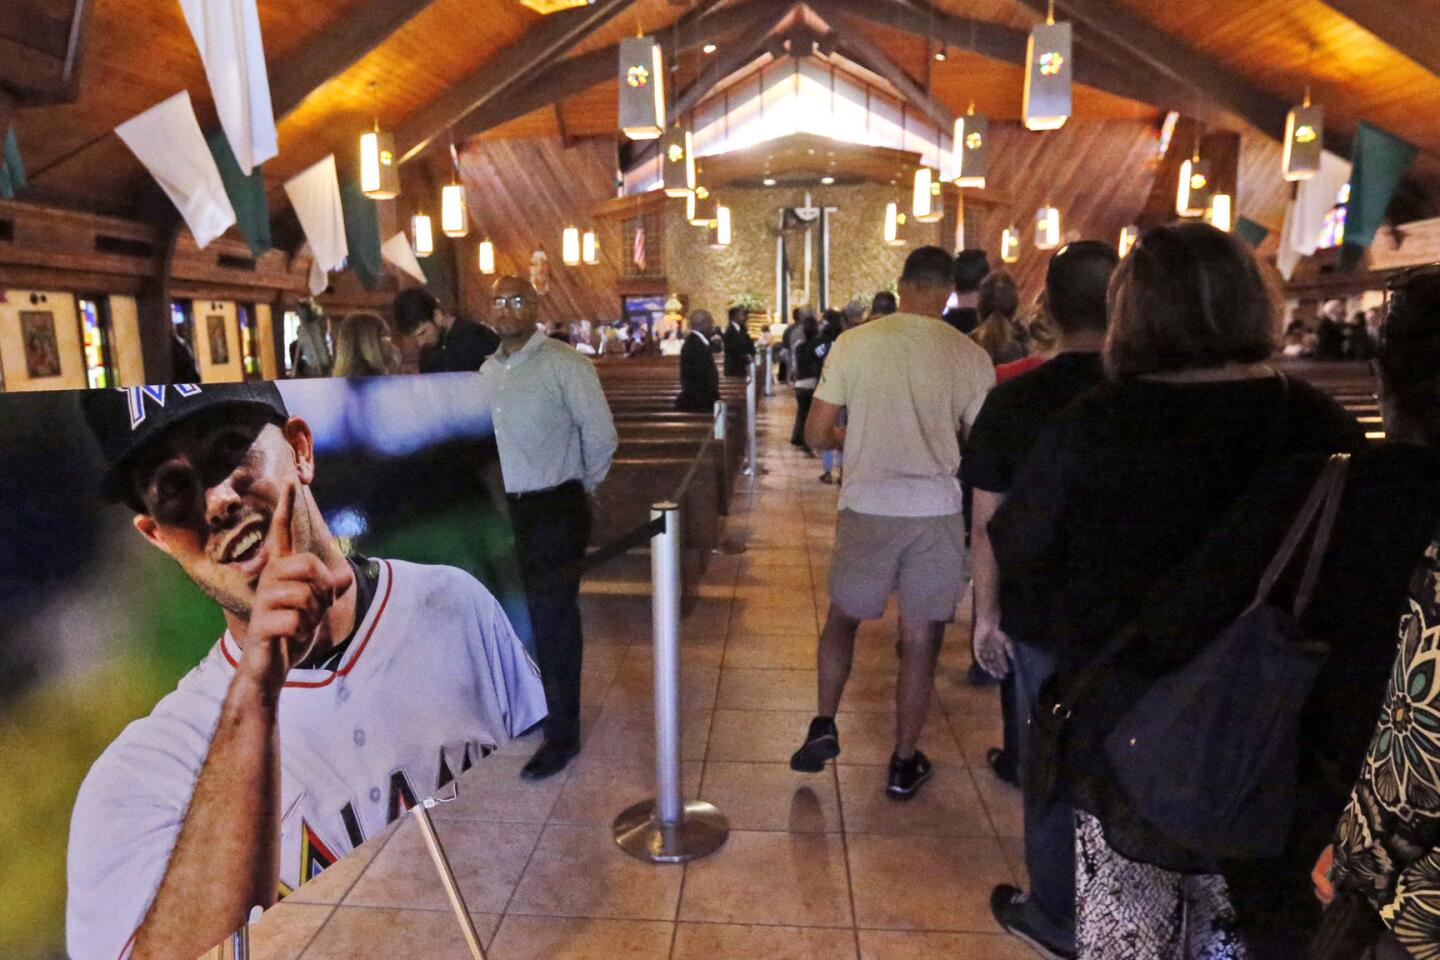 Miami Says Final Farewell to Jose Fernandez With Funeral